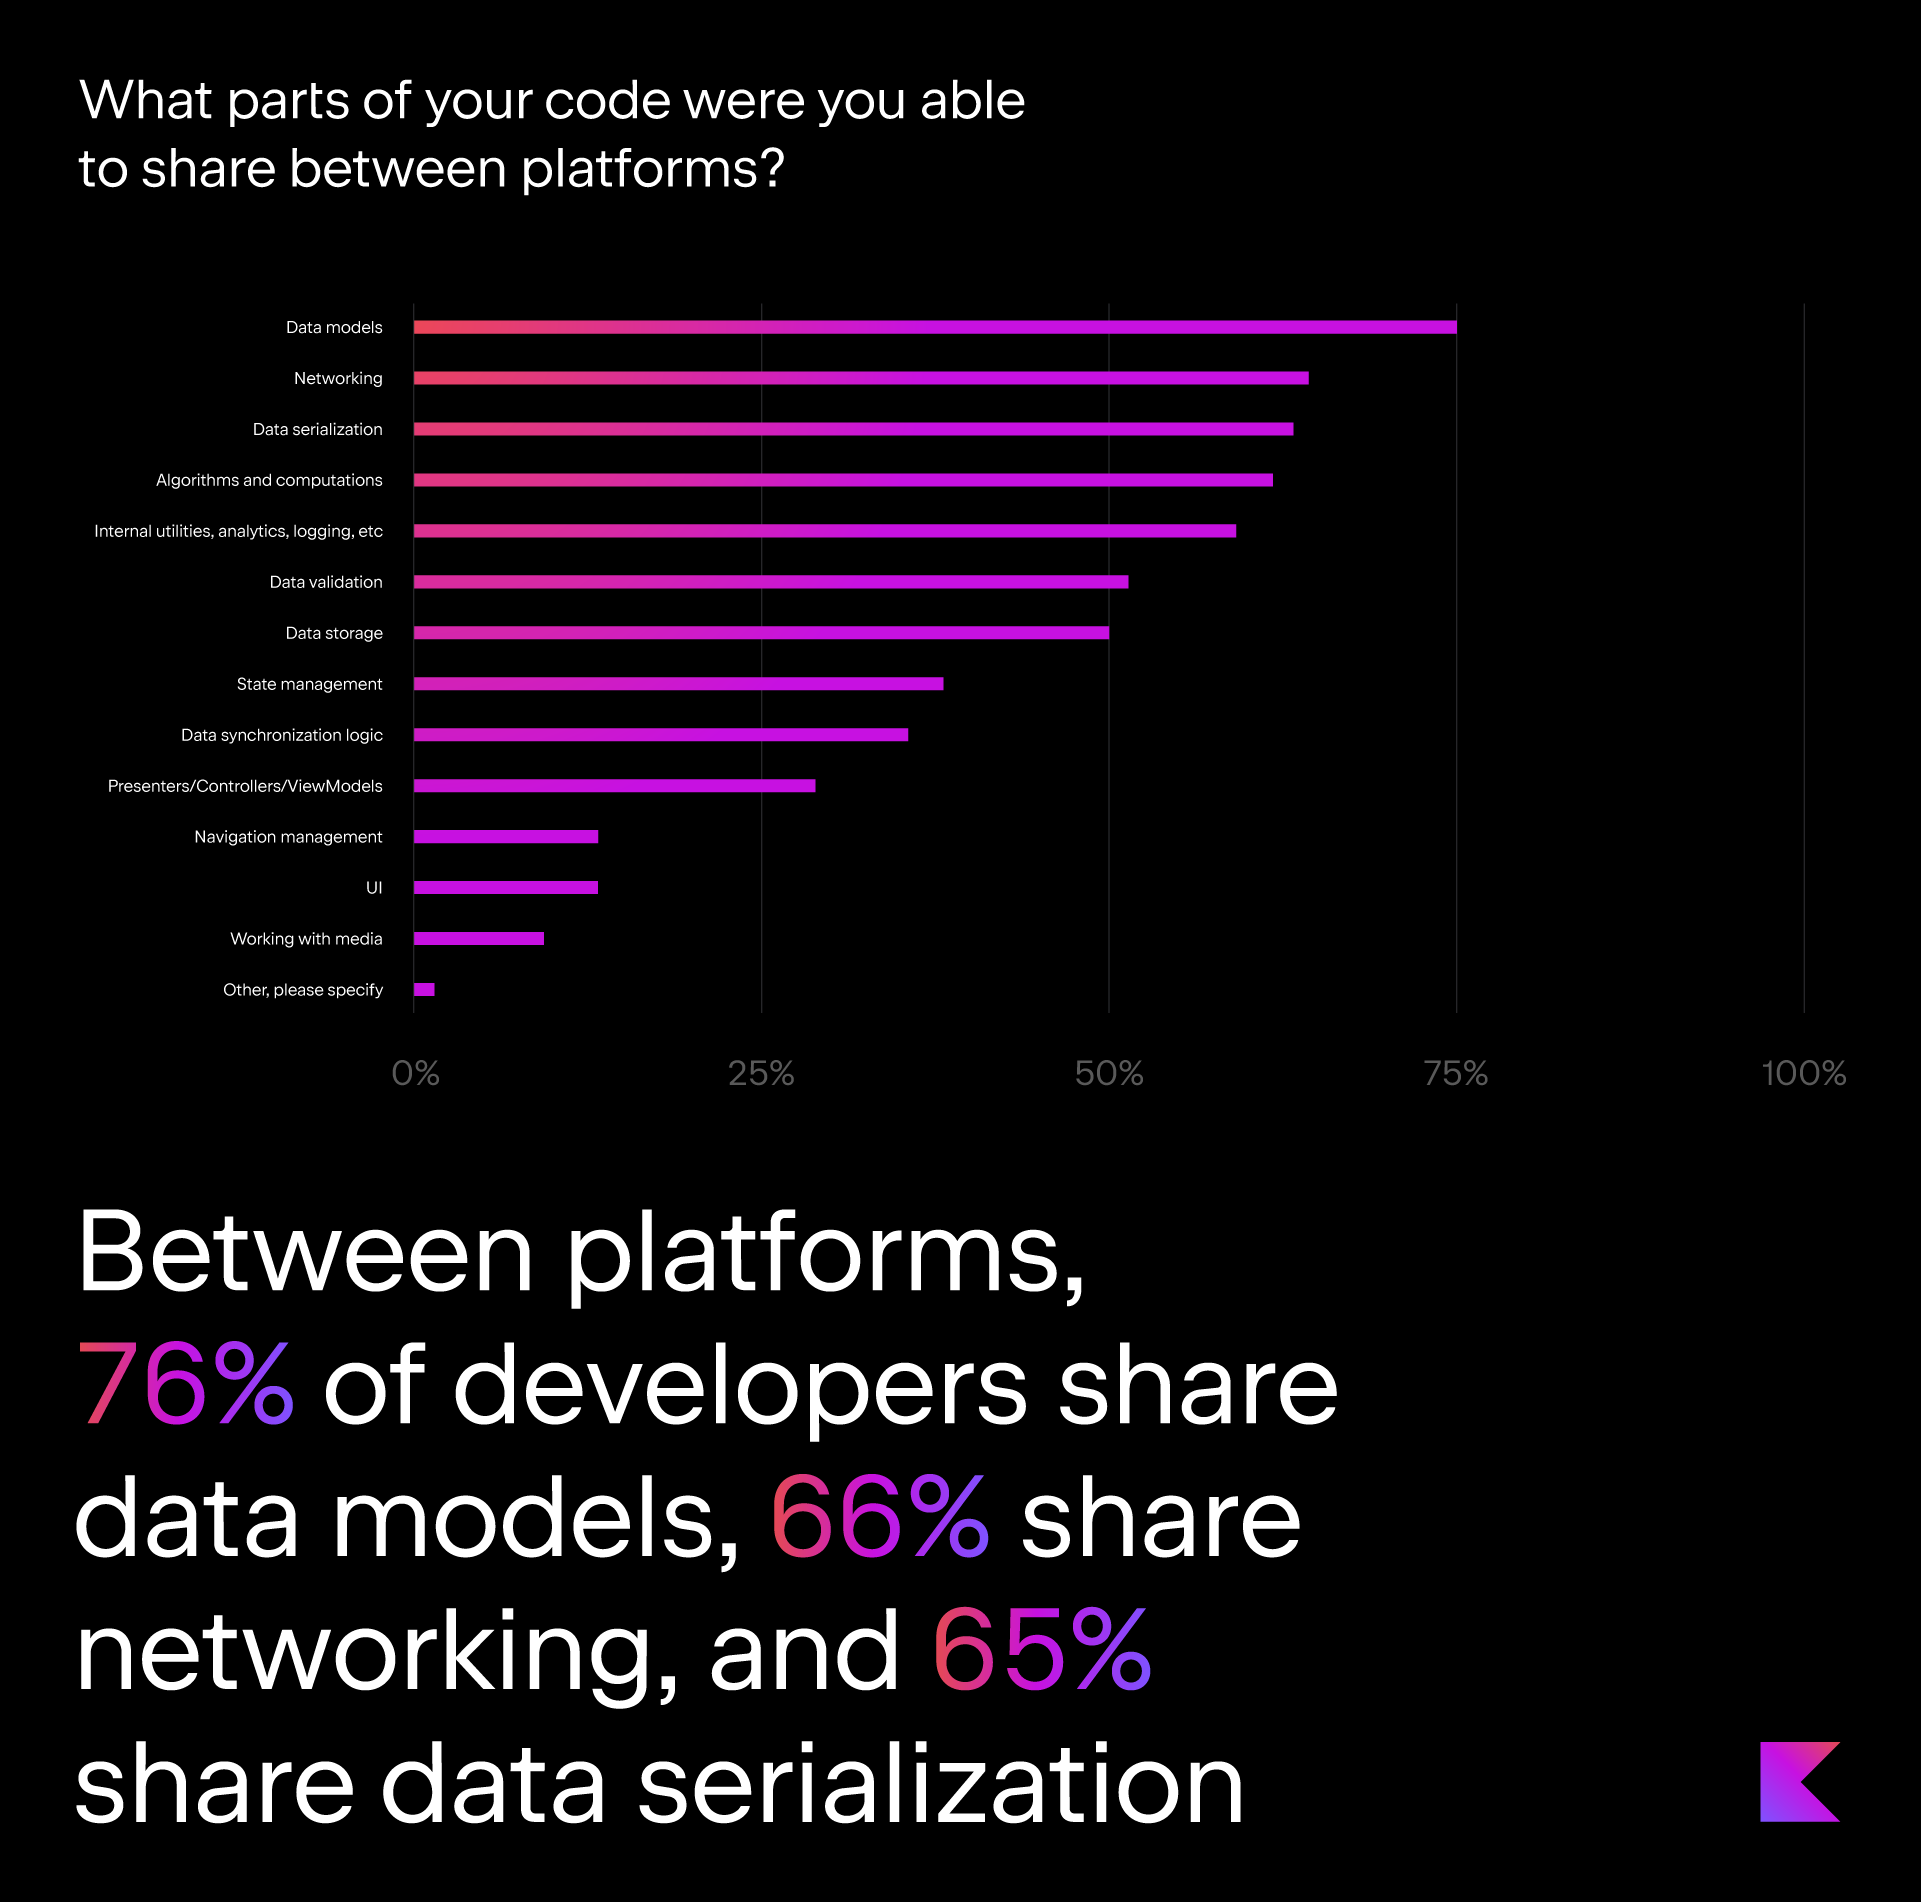 Between platforms, 76% of developers share data models, and 66% share networking